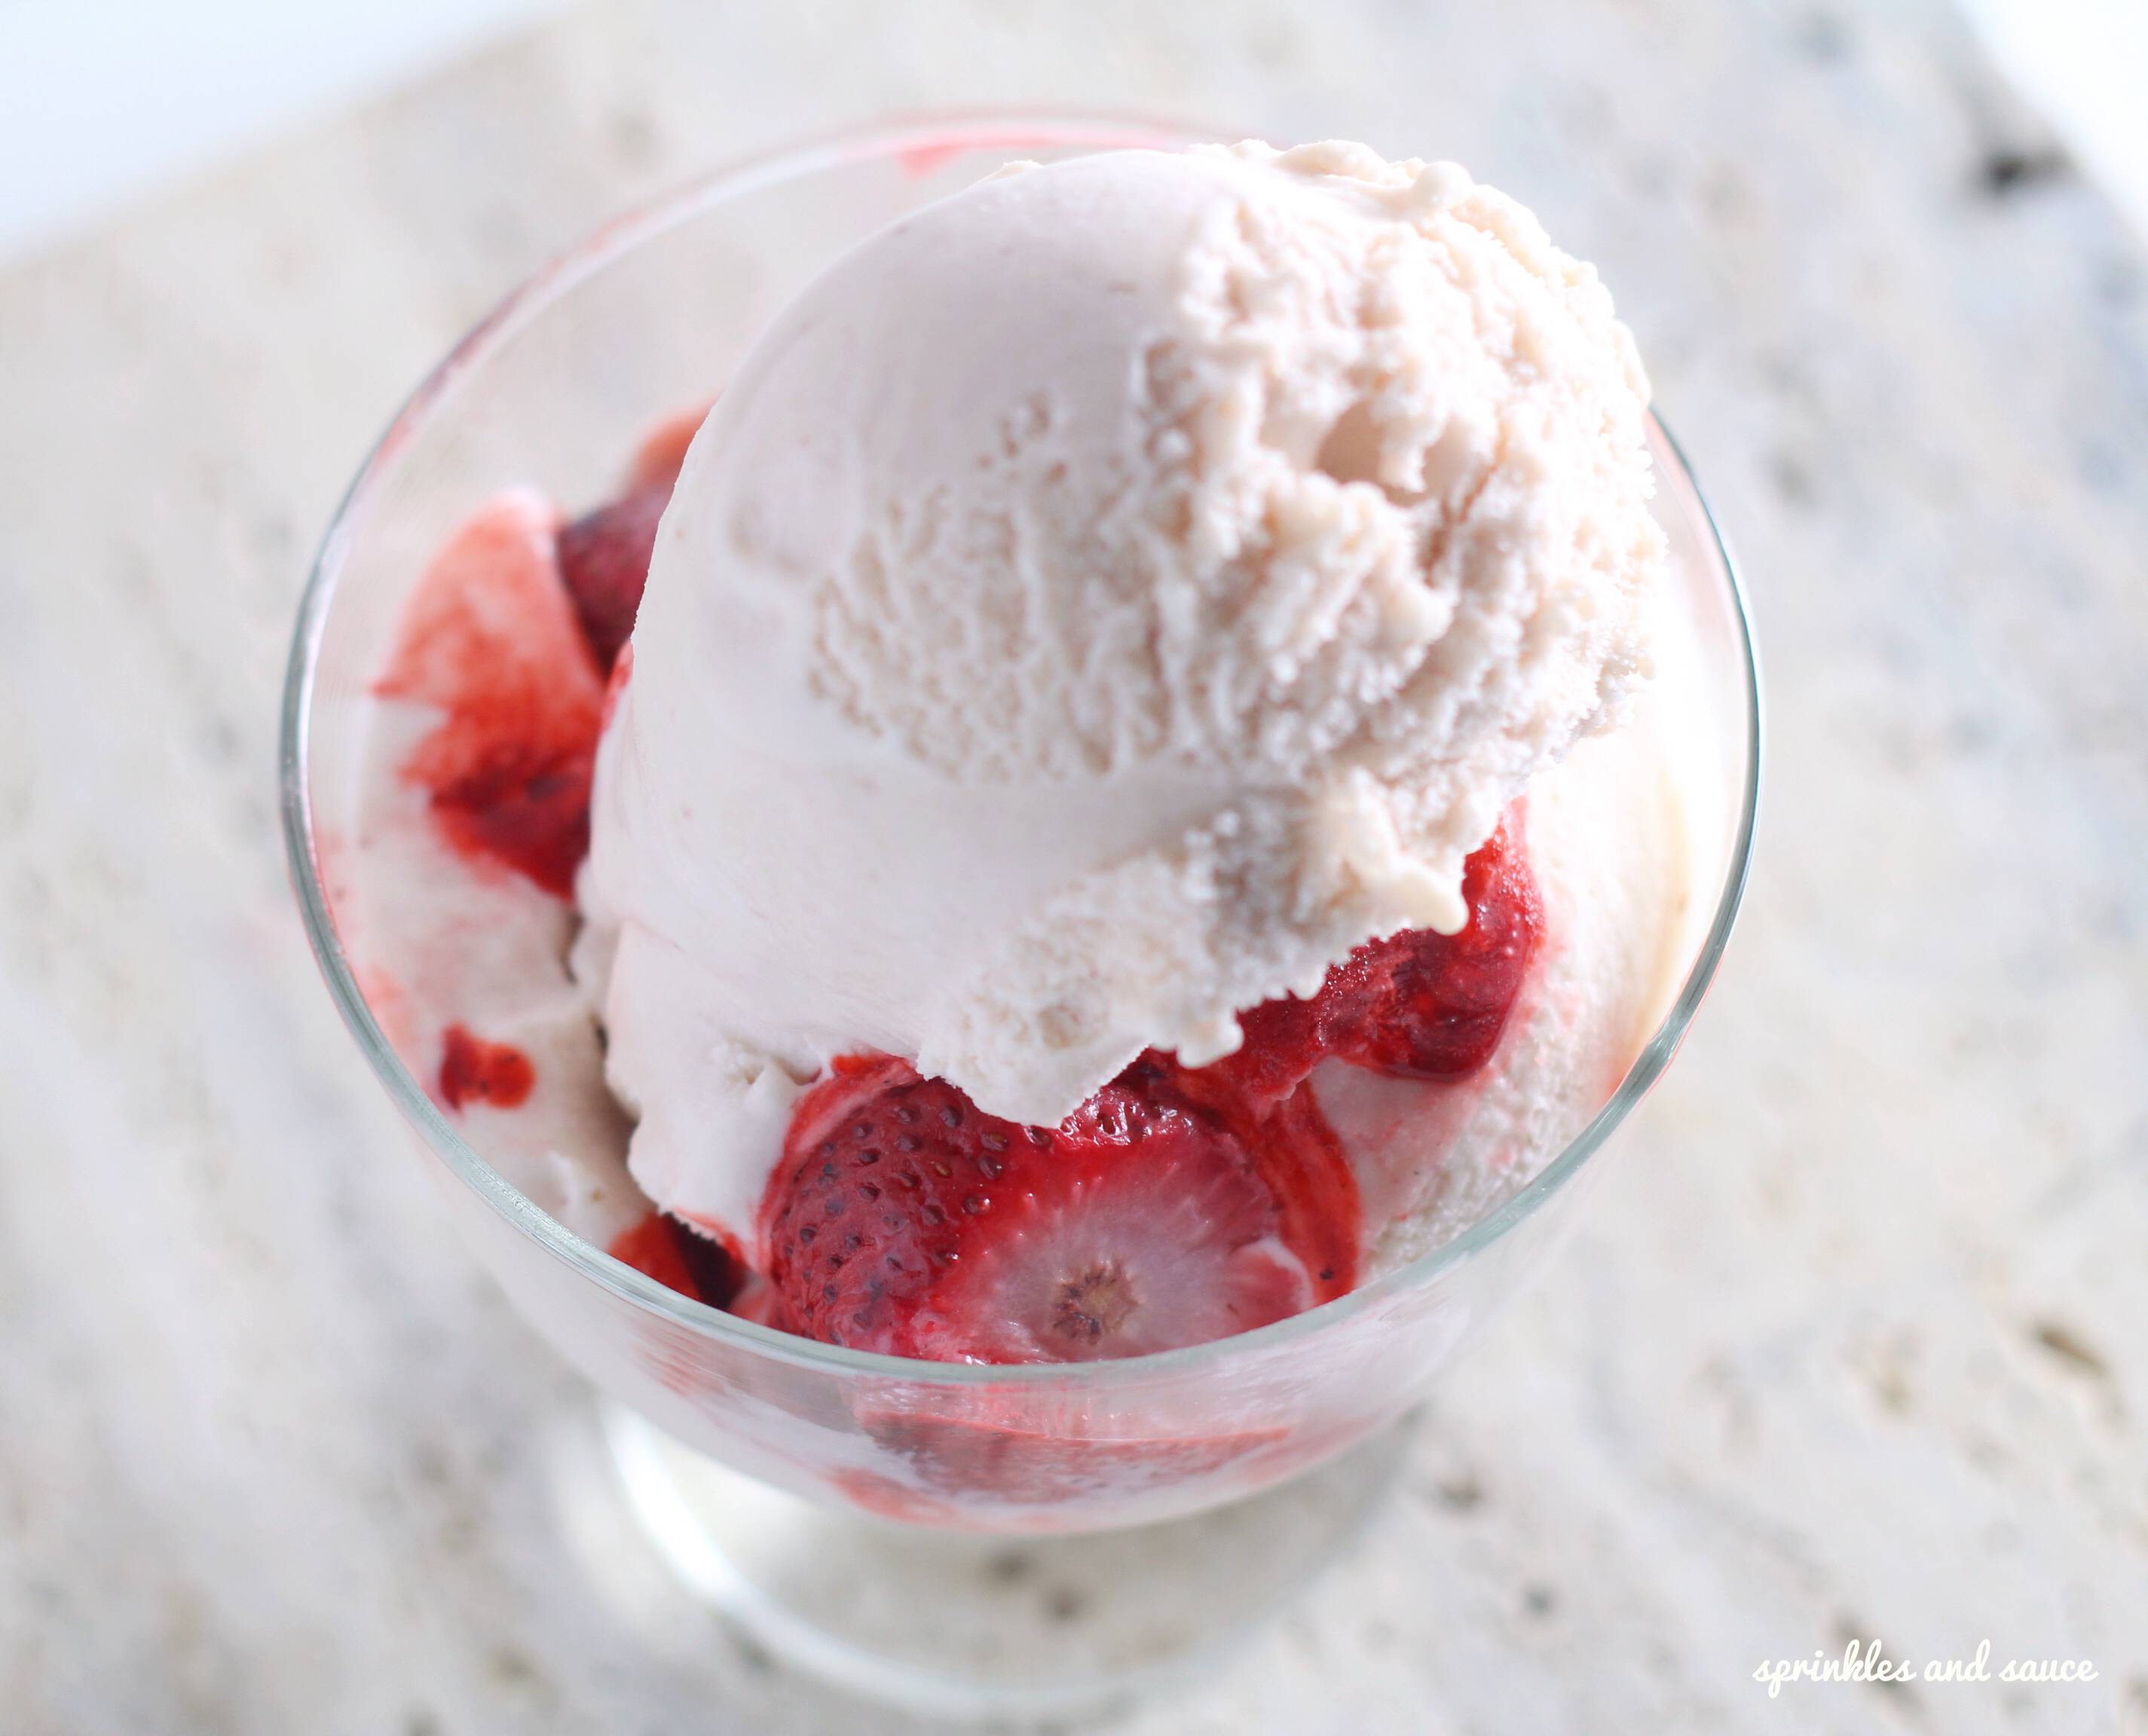 Strawberry Ice Cream with Roasted Strawberries